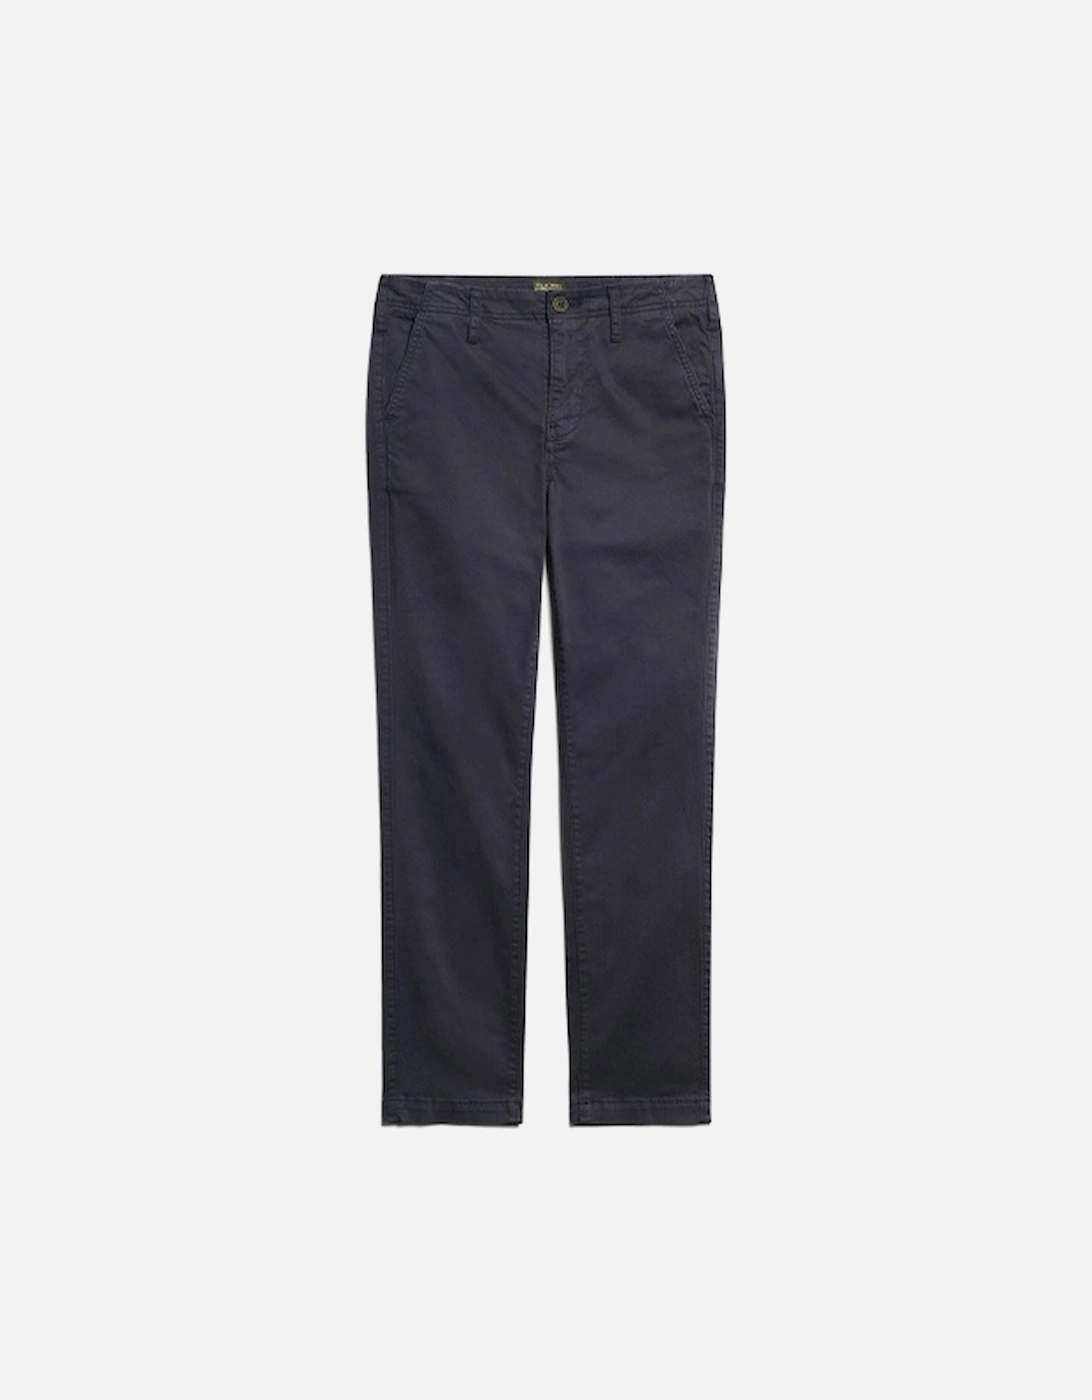 Women's Mid Rise Chino Eclipse Navy